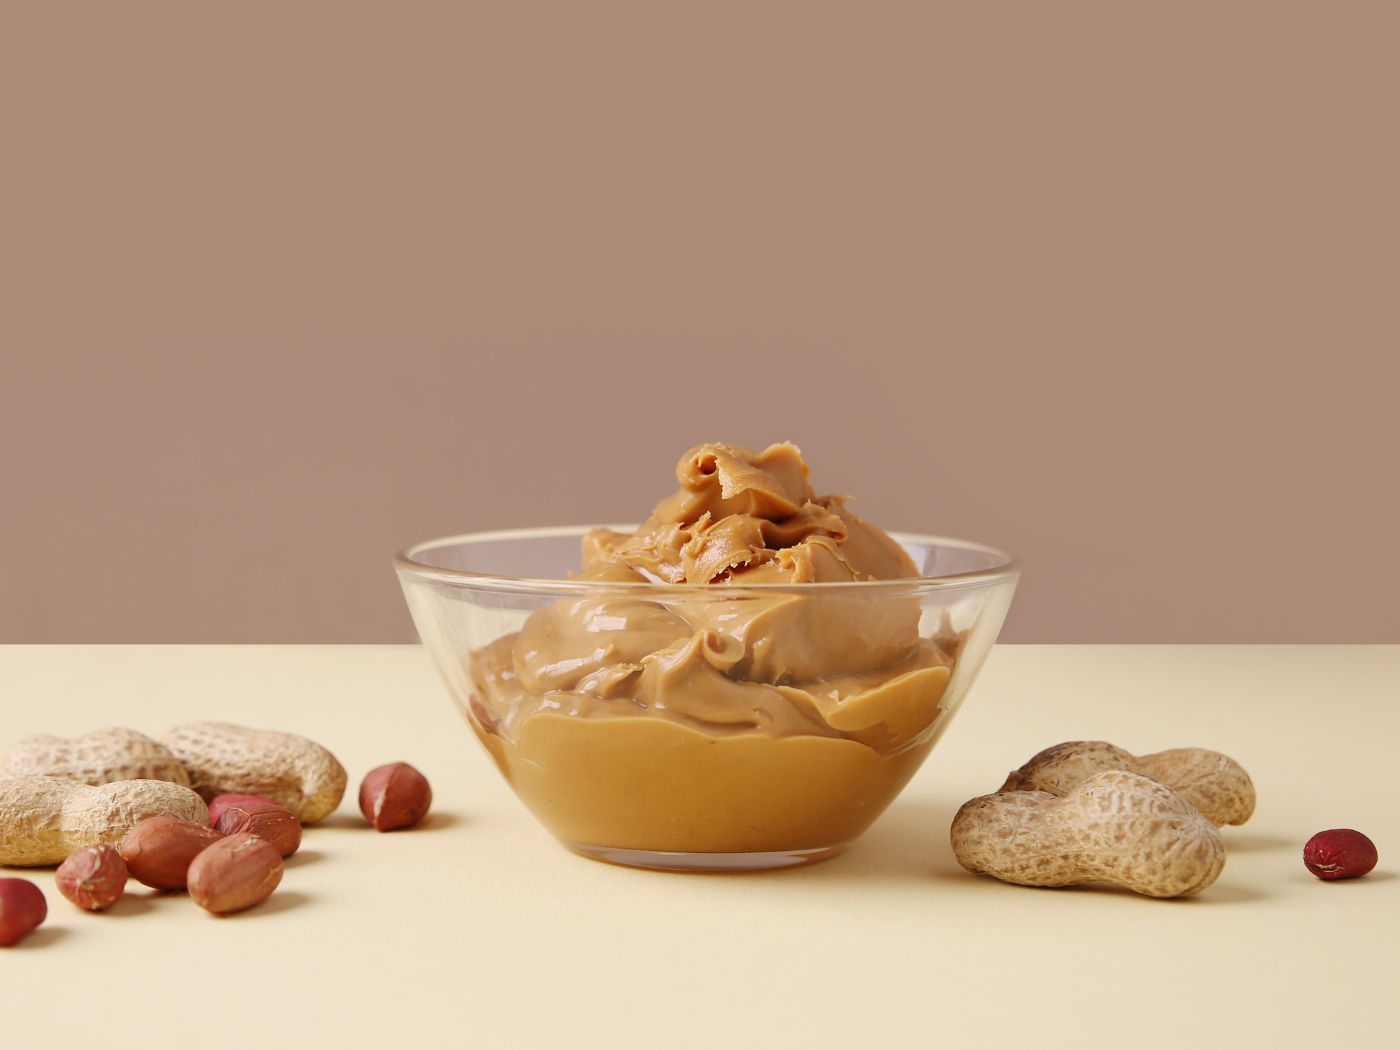 Almond Butter vs Peanut Butter: Which One is More Sustainable?